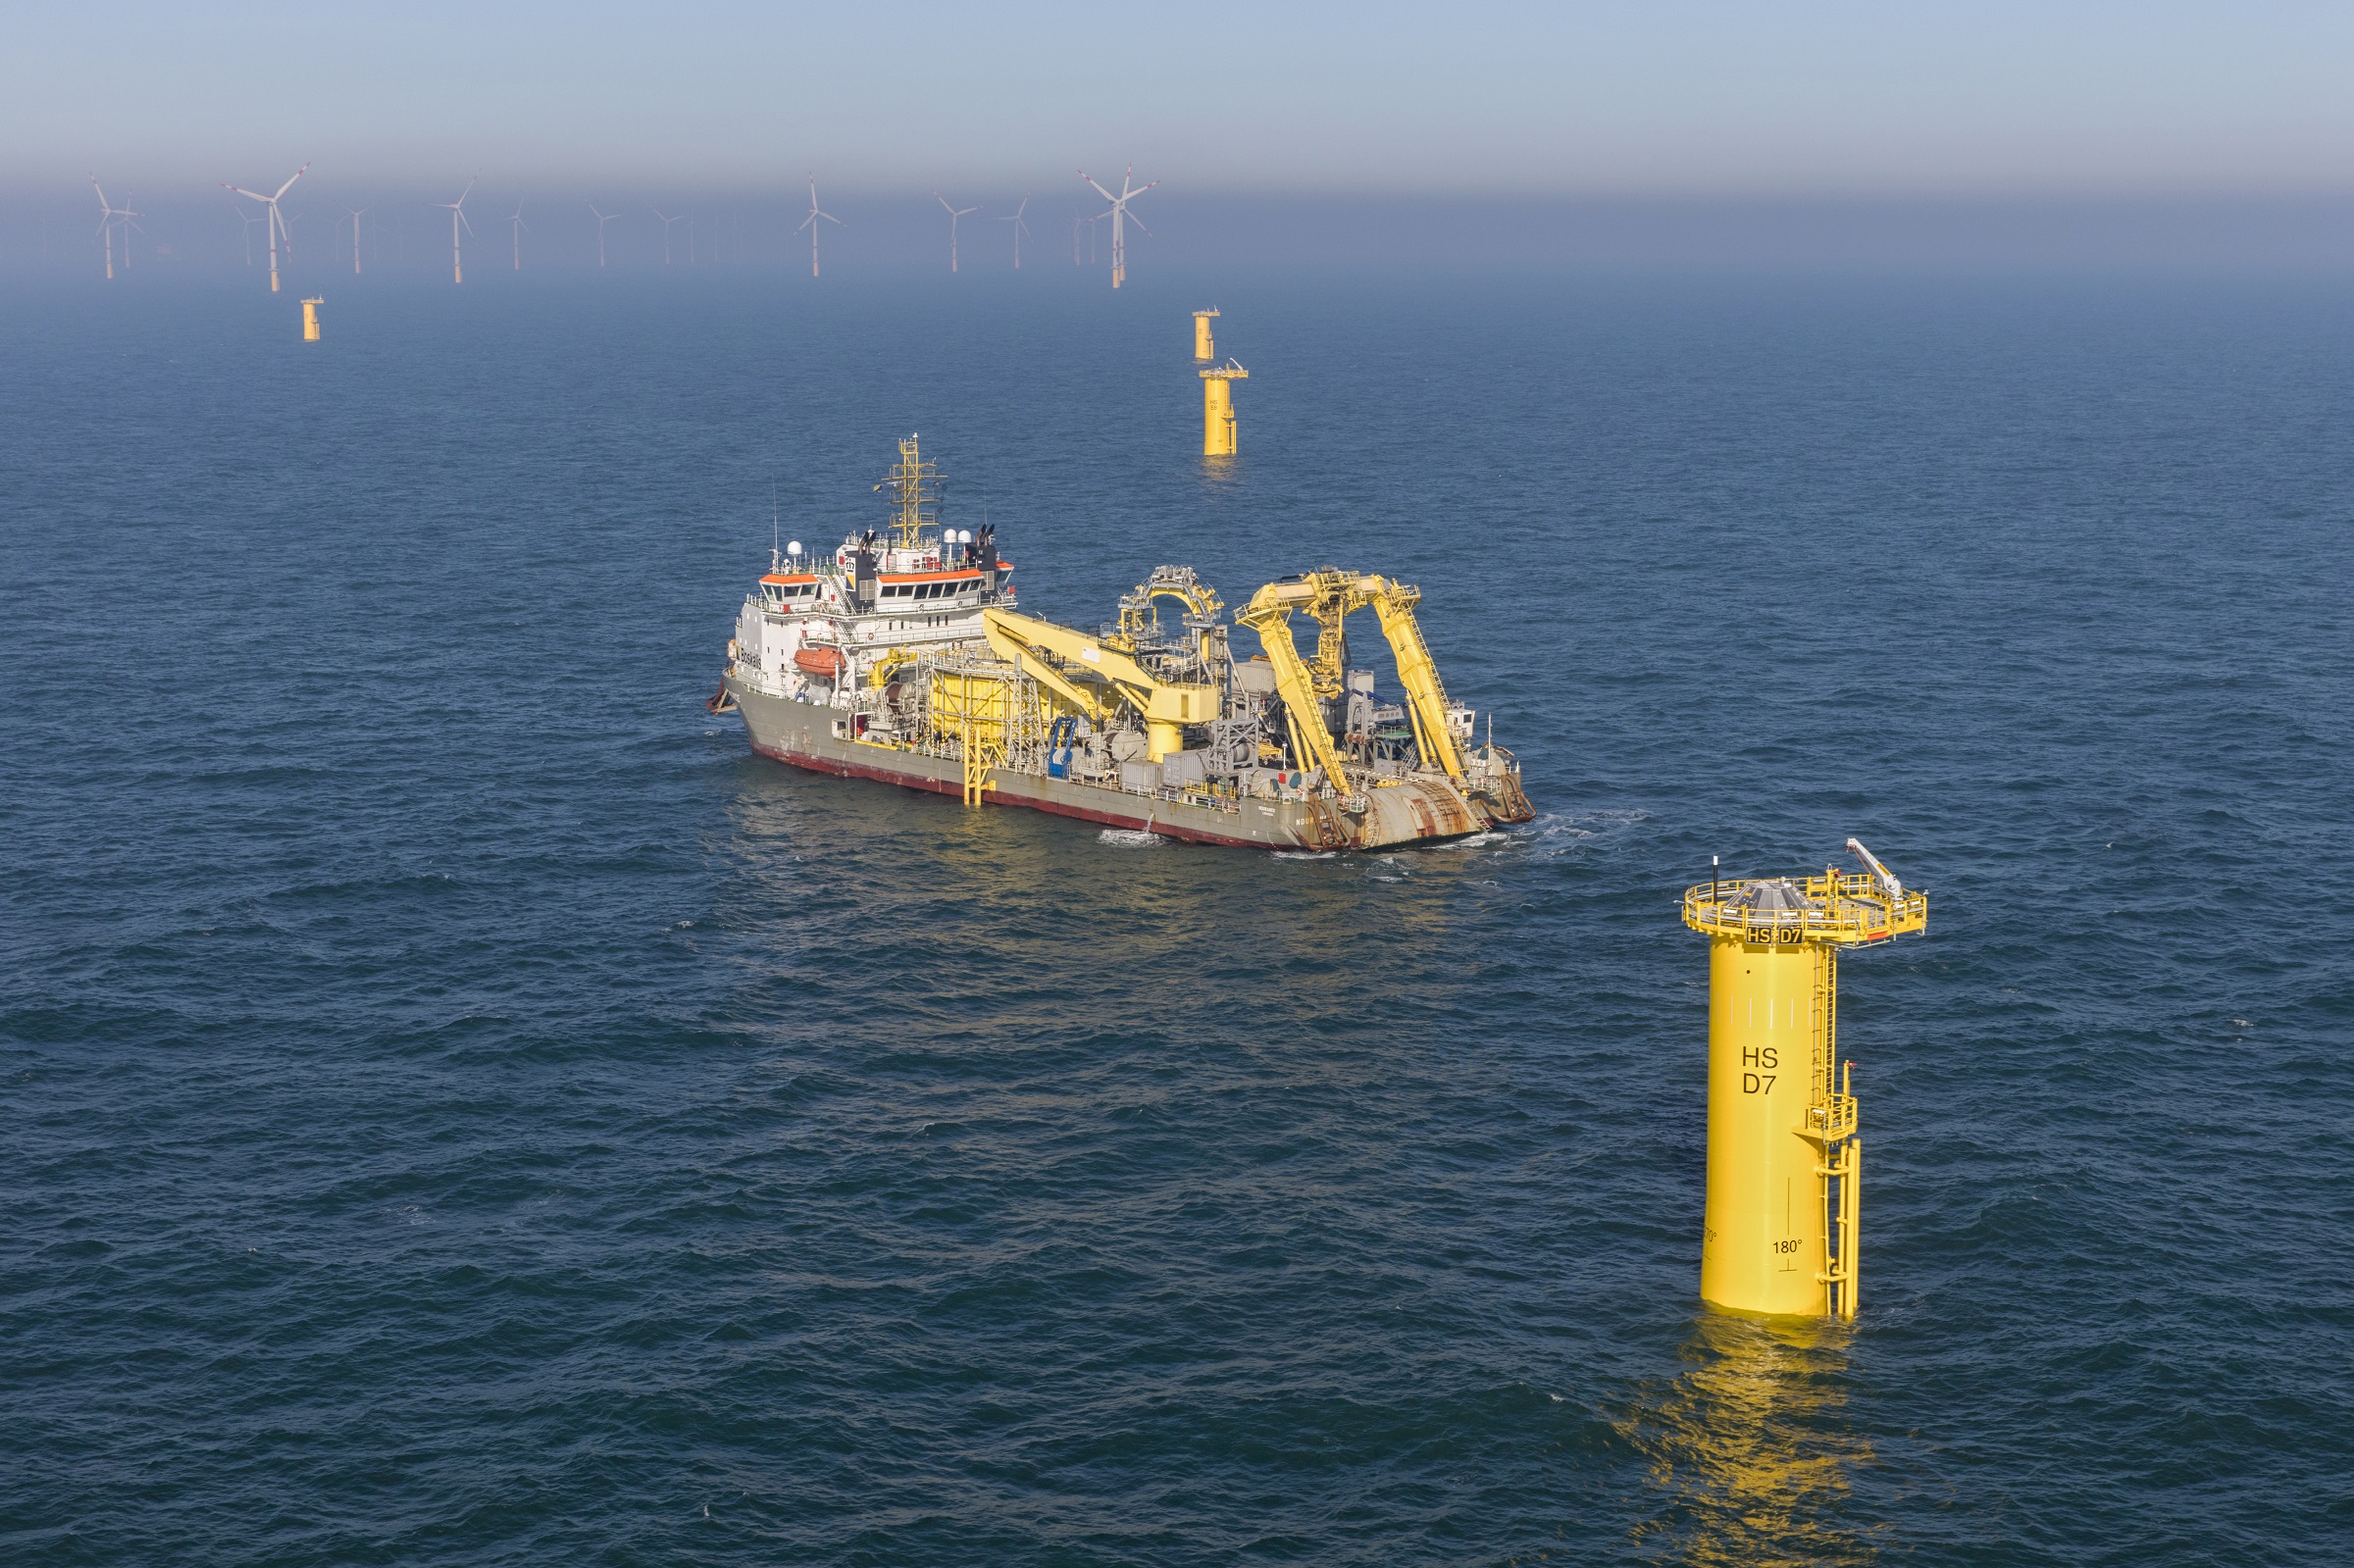 Boskalis acquires inter-array cabling contract for Borkum Riffgrund 3 and Gode Wind 3 offshore wind farms